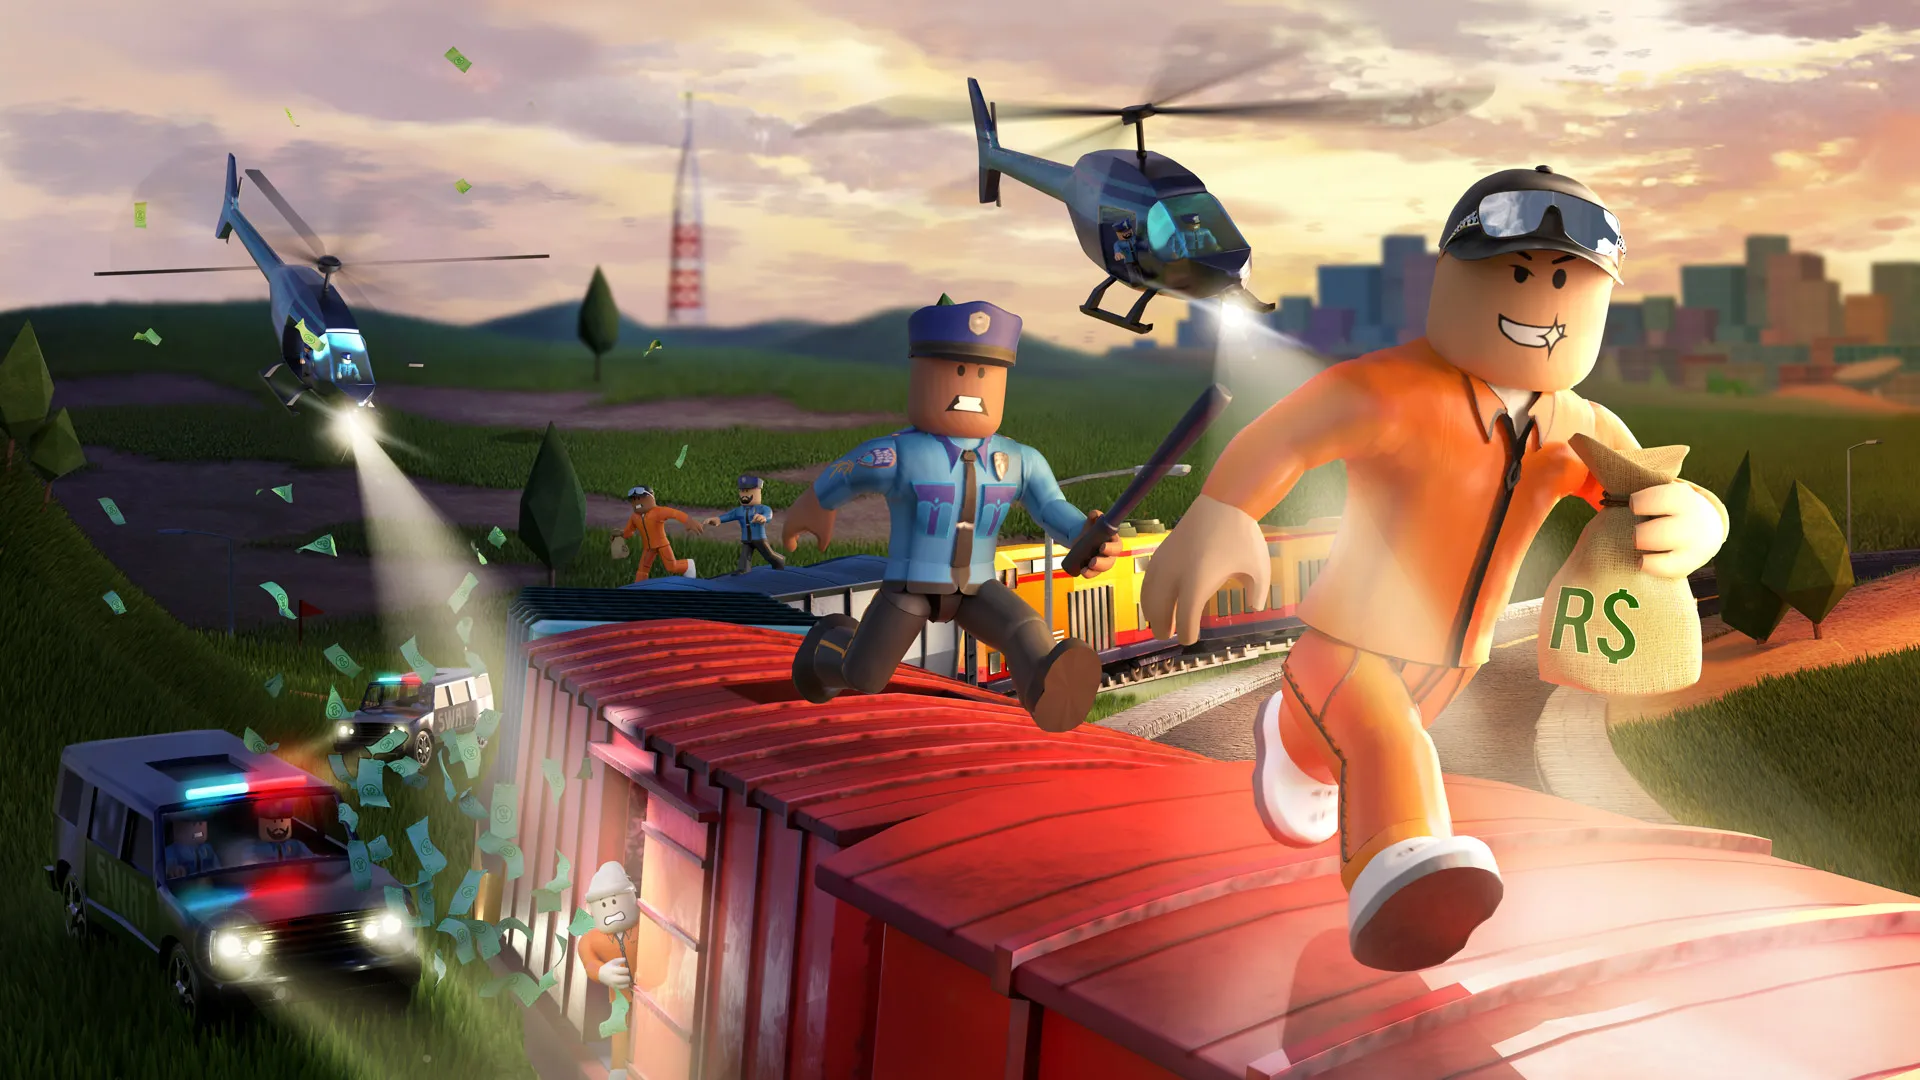 Embark on an epic adventure in this thrilling Roblox game!